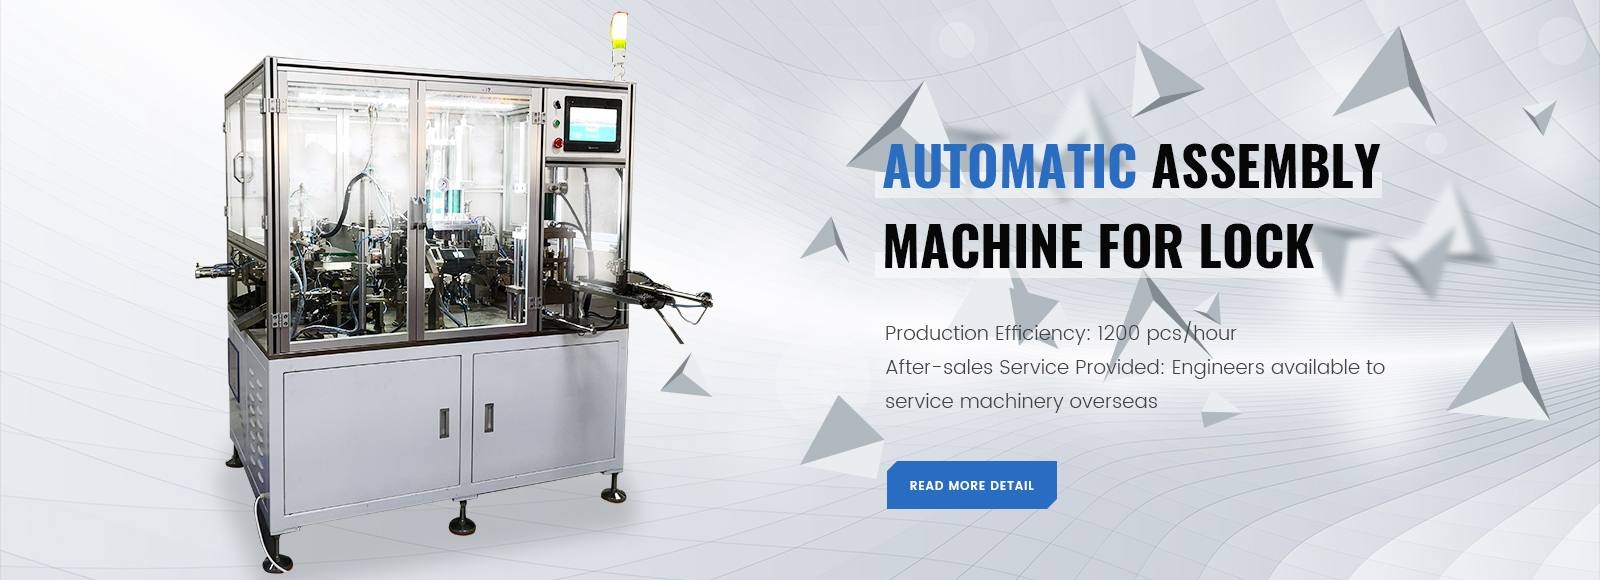 Automatic Assembly Machine For Lock